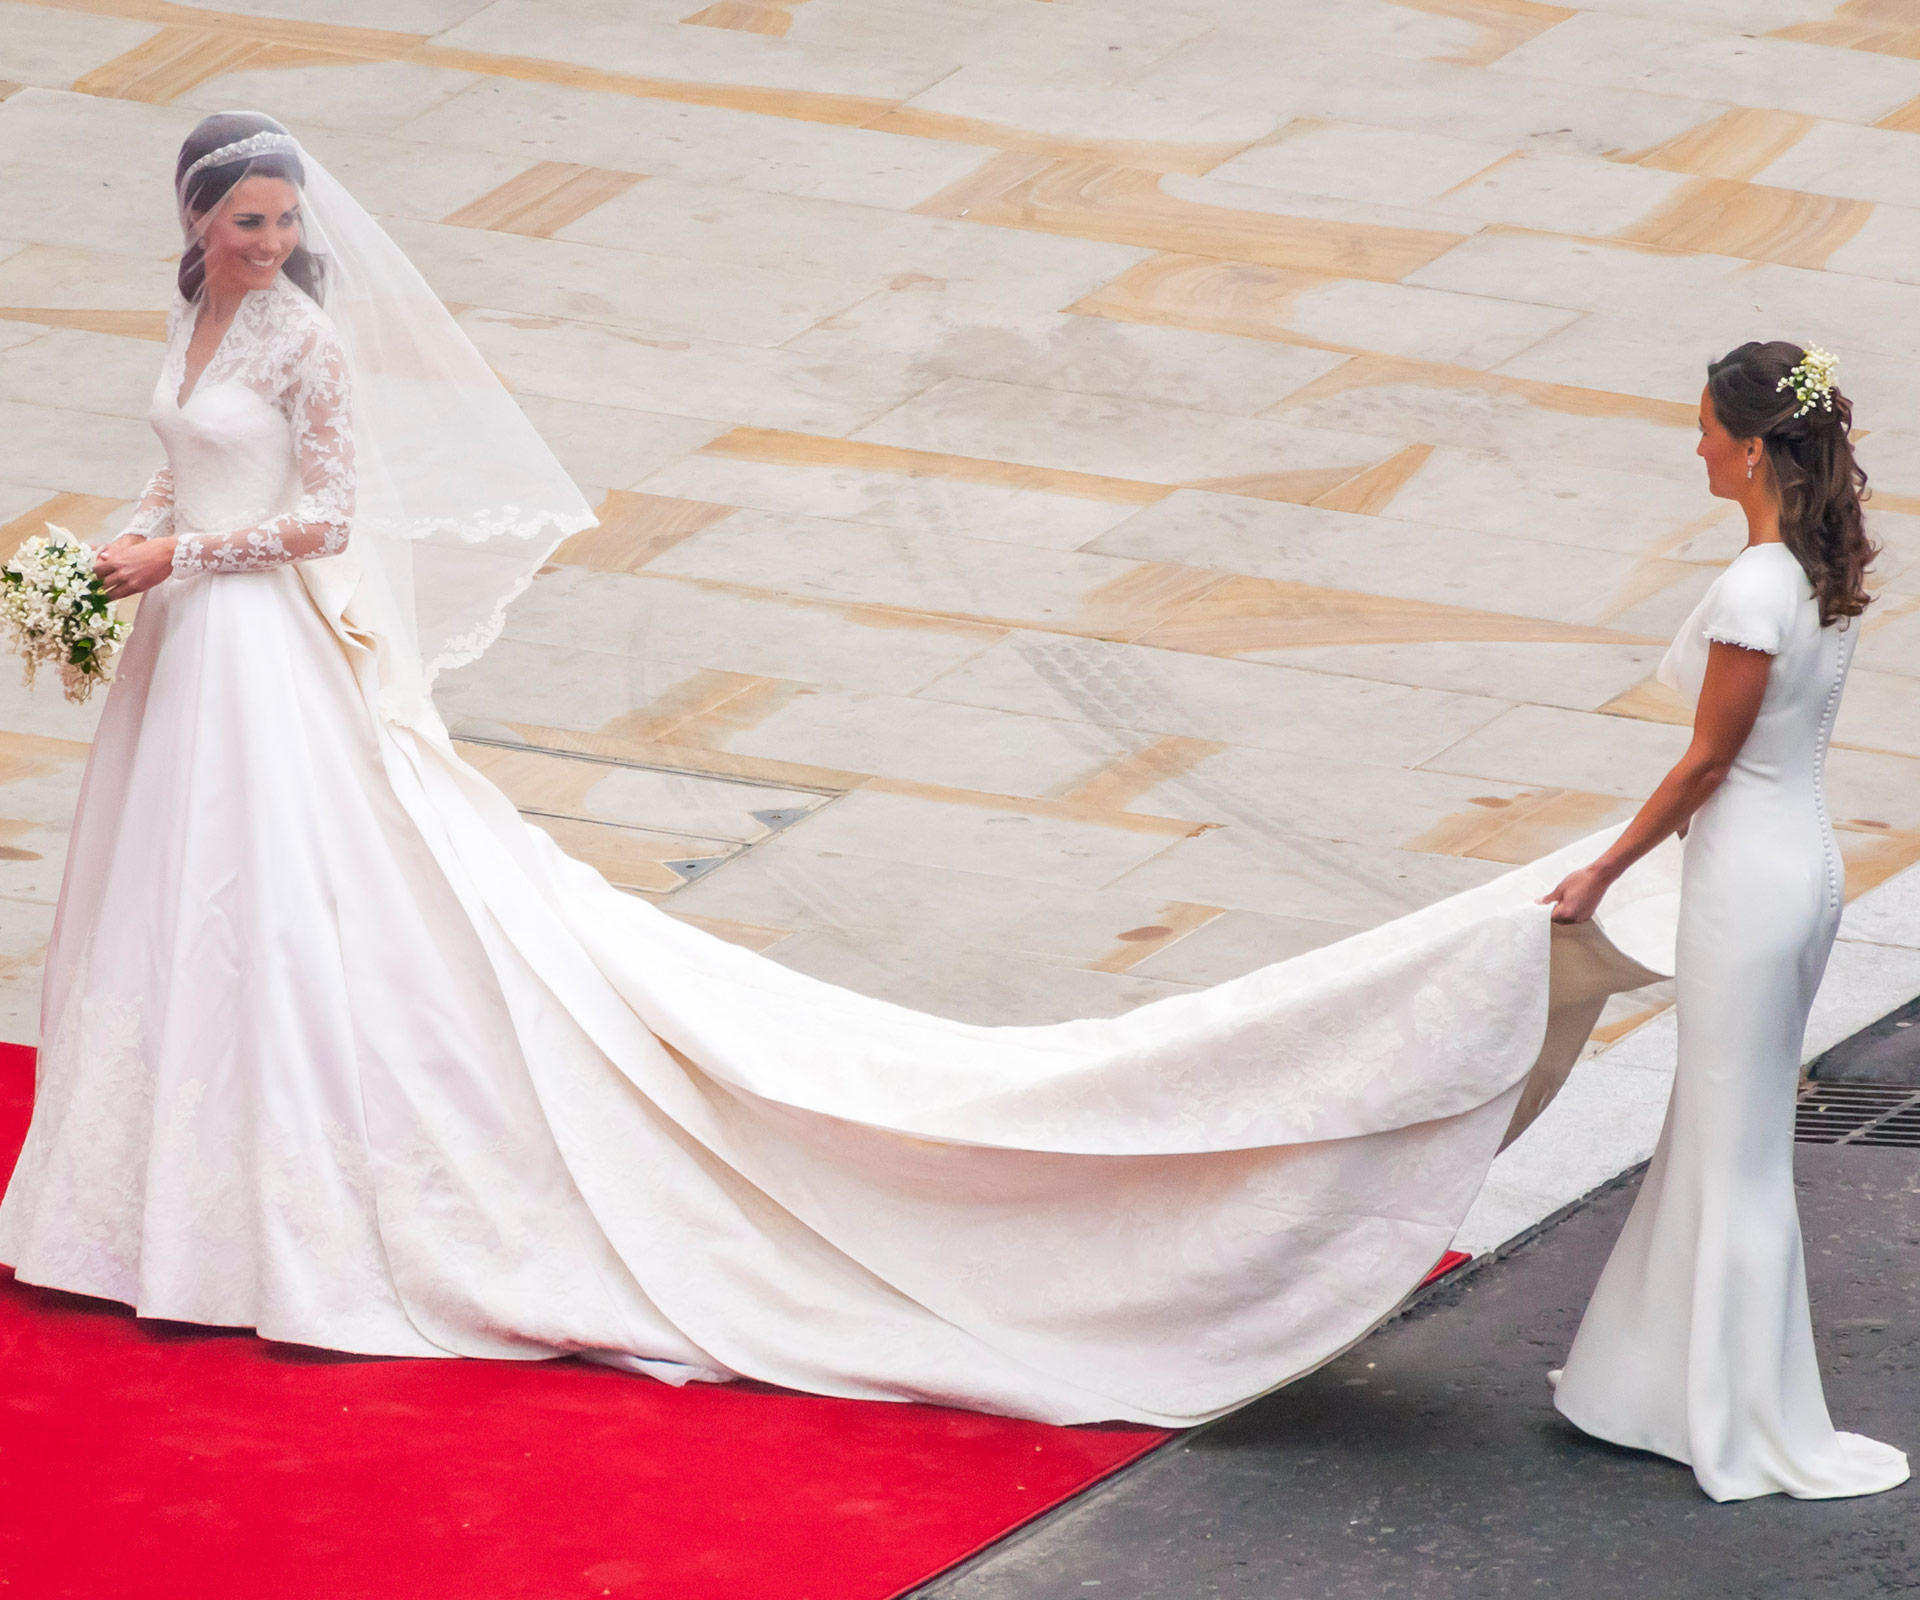 Pippa Middleton and Duchess Catherine